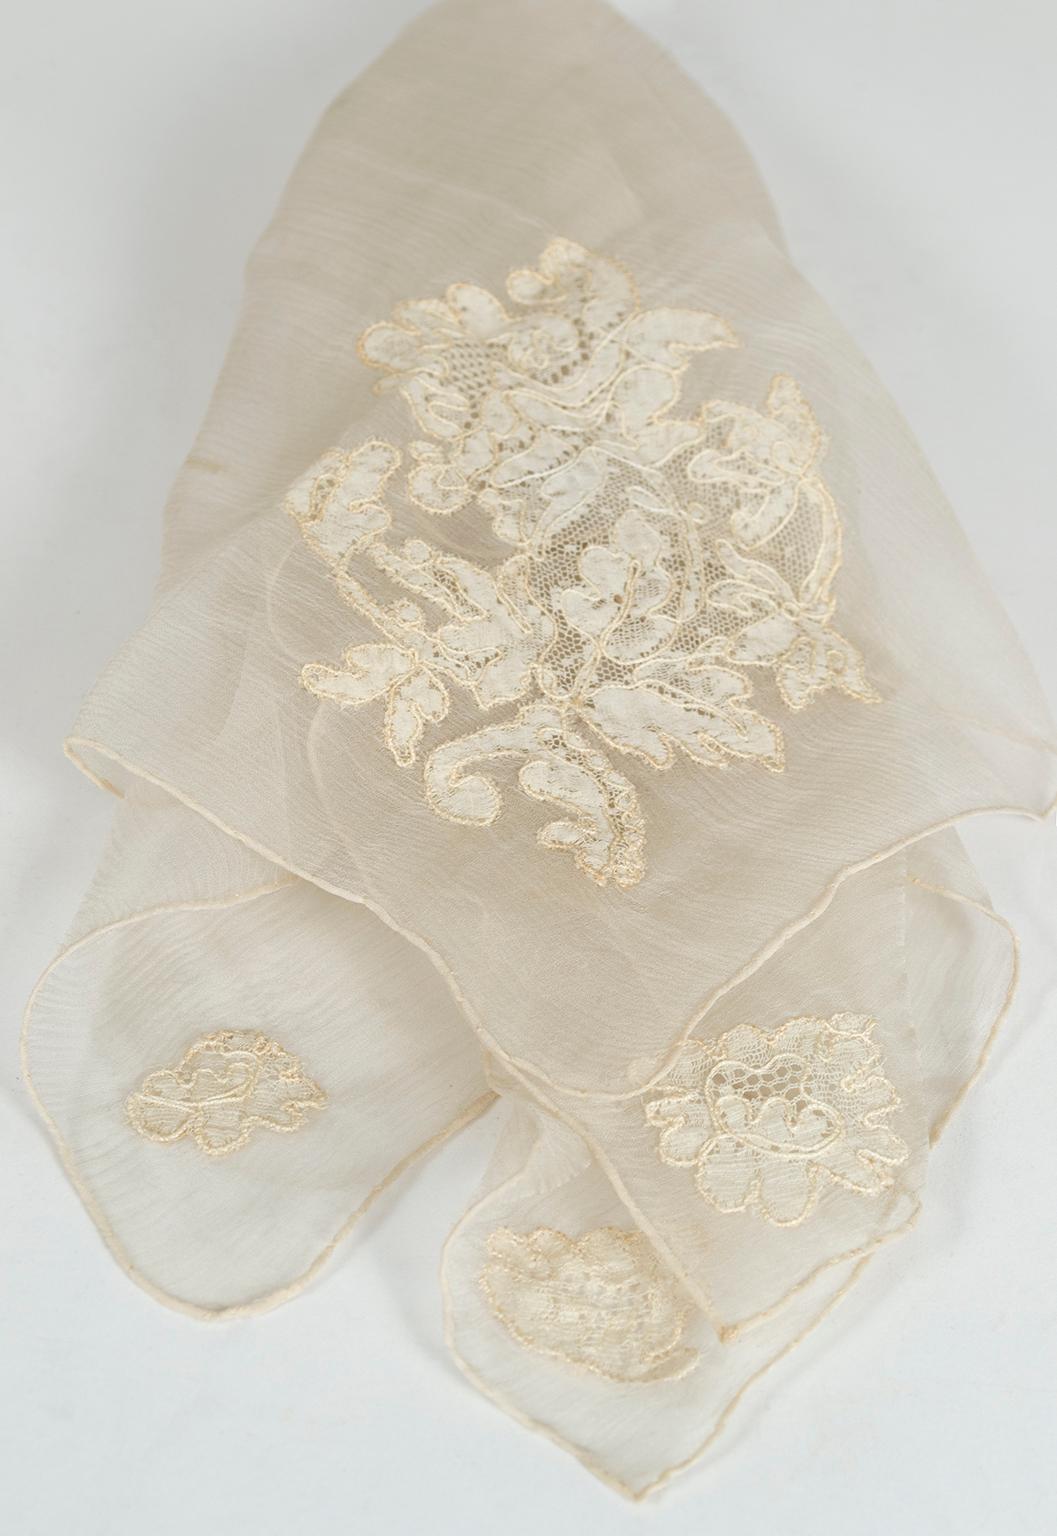 An affectionate memory of a bygone era, vintage handkerchiefs make heartfelt gifts appropriate for almost any occasion. This exceptional example is almost too beautiful to be used as a mouchoir and is large enough to be worn as a scarf if you choose